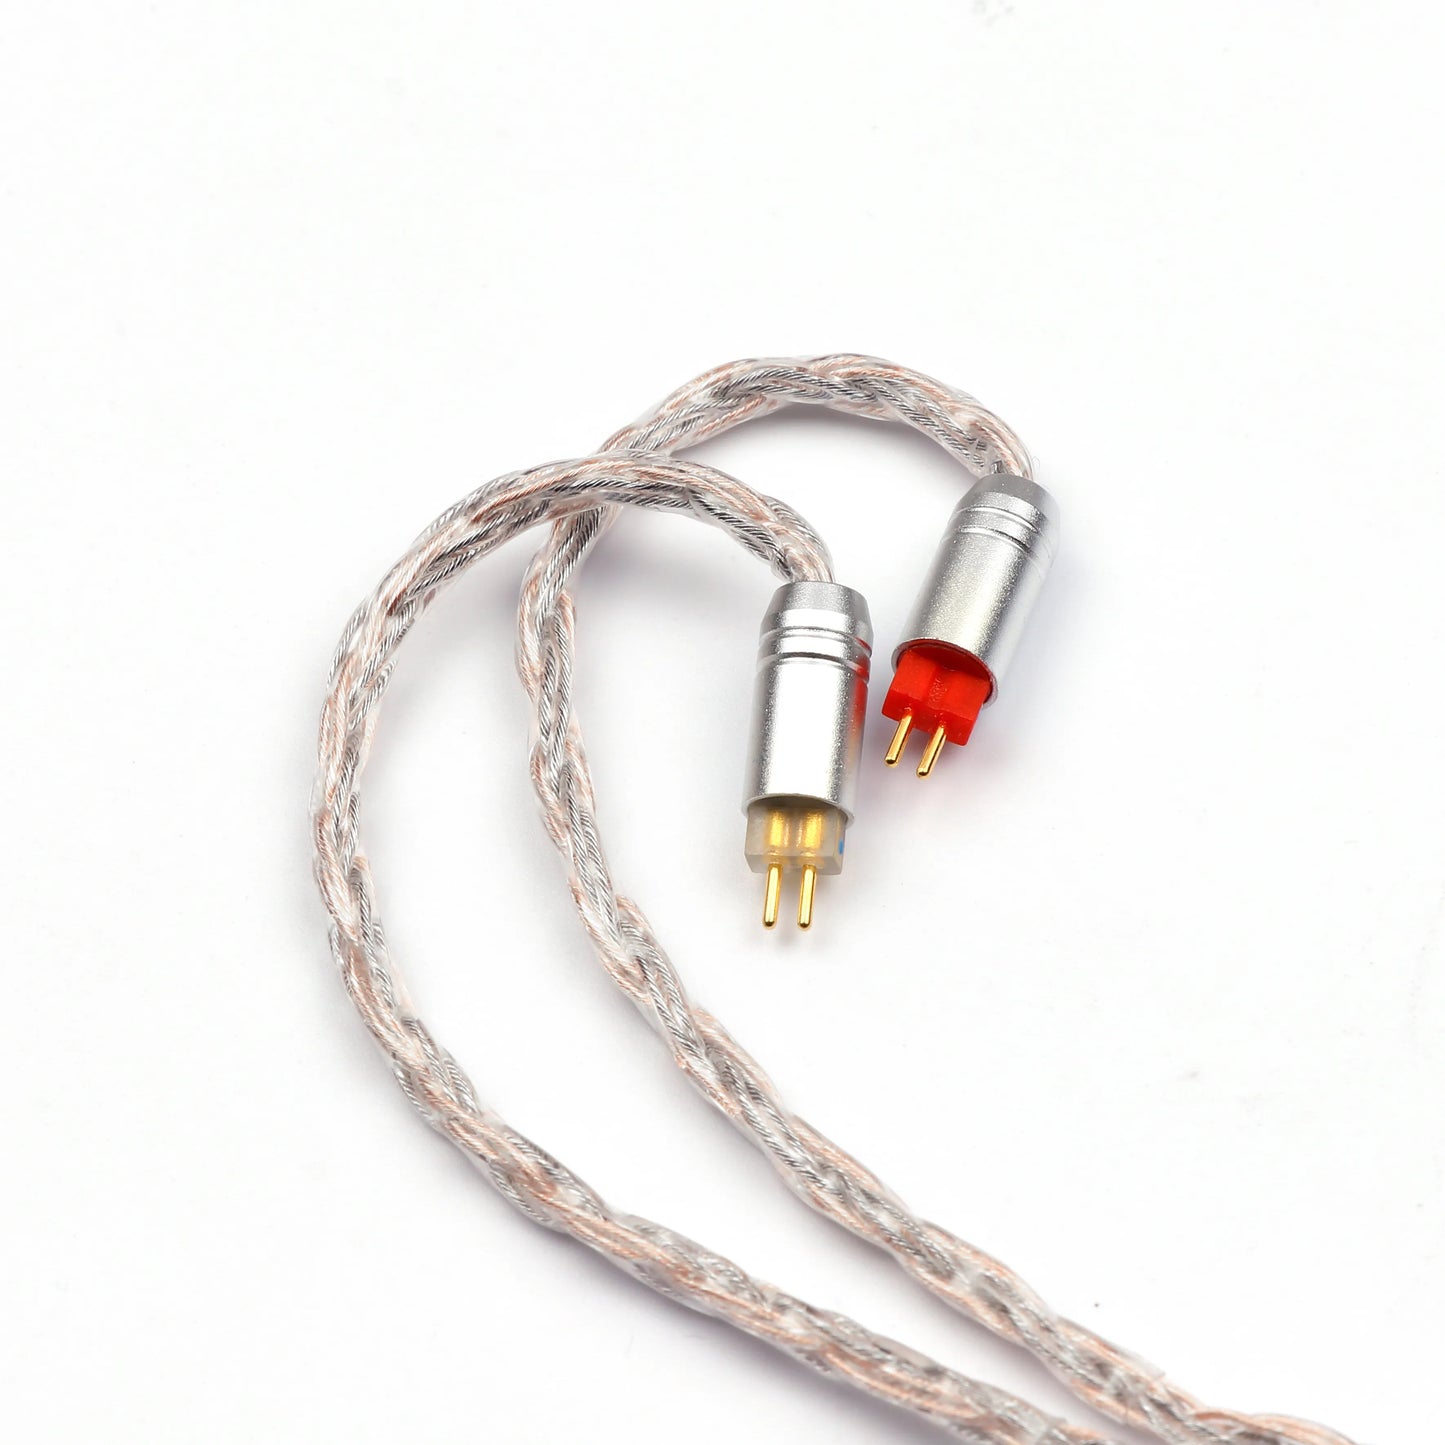 TRIPOWIN Jelly Upgraded 16 Core 21 Wire Per Core Earphone Cable